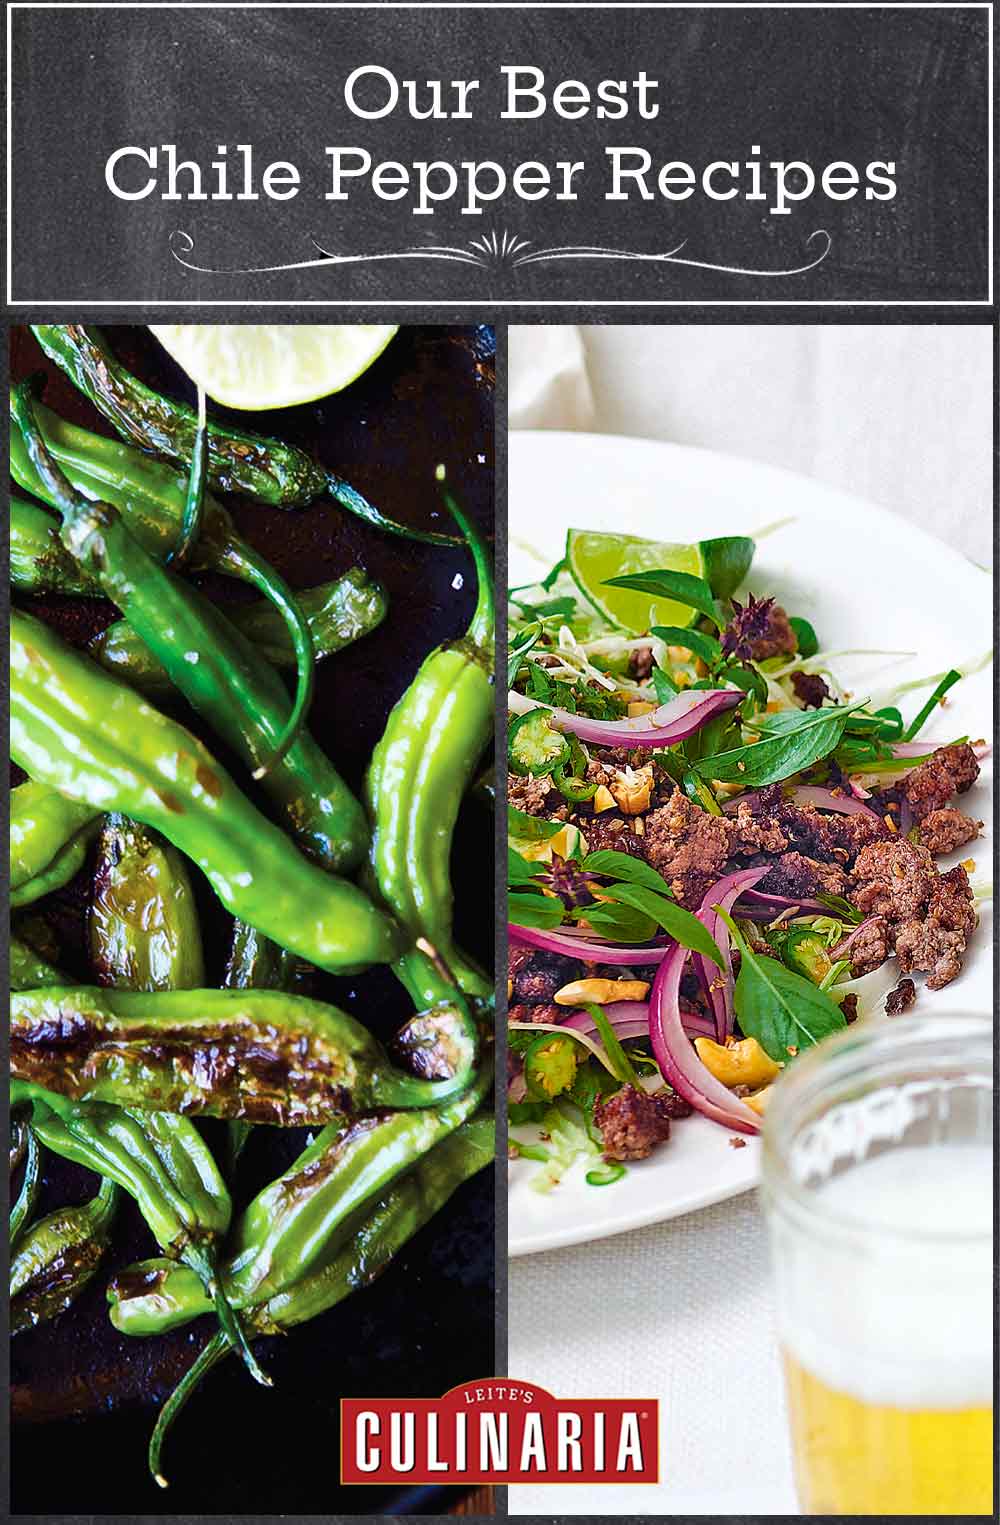 Images of two of the 15 chile pepper recipes -- blistered shishito peppers, and Thai beef salad.